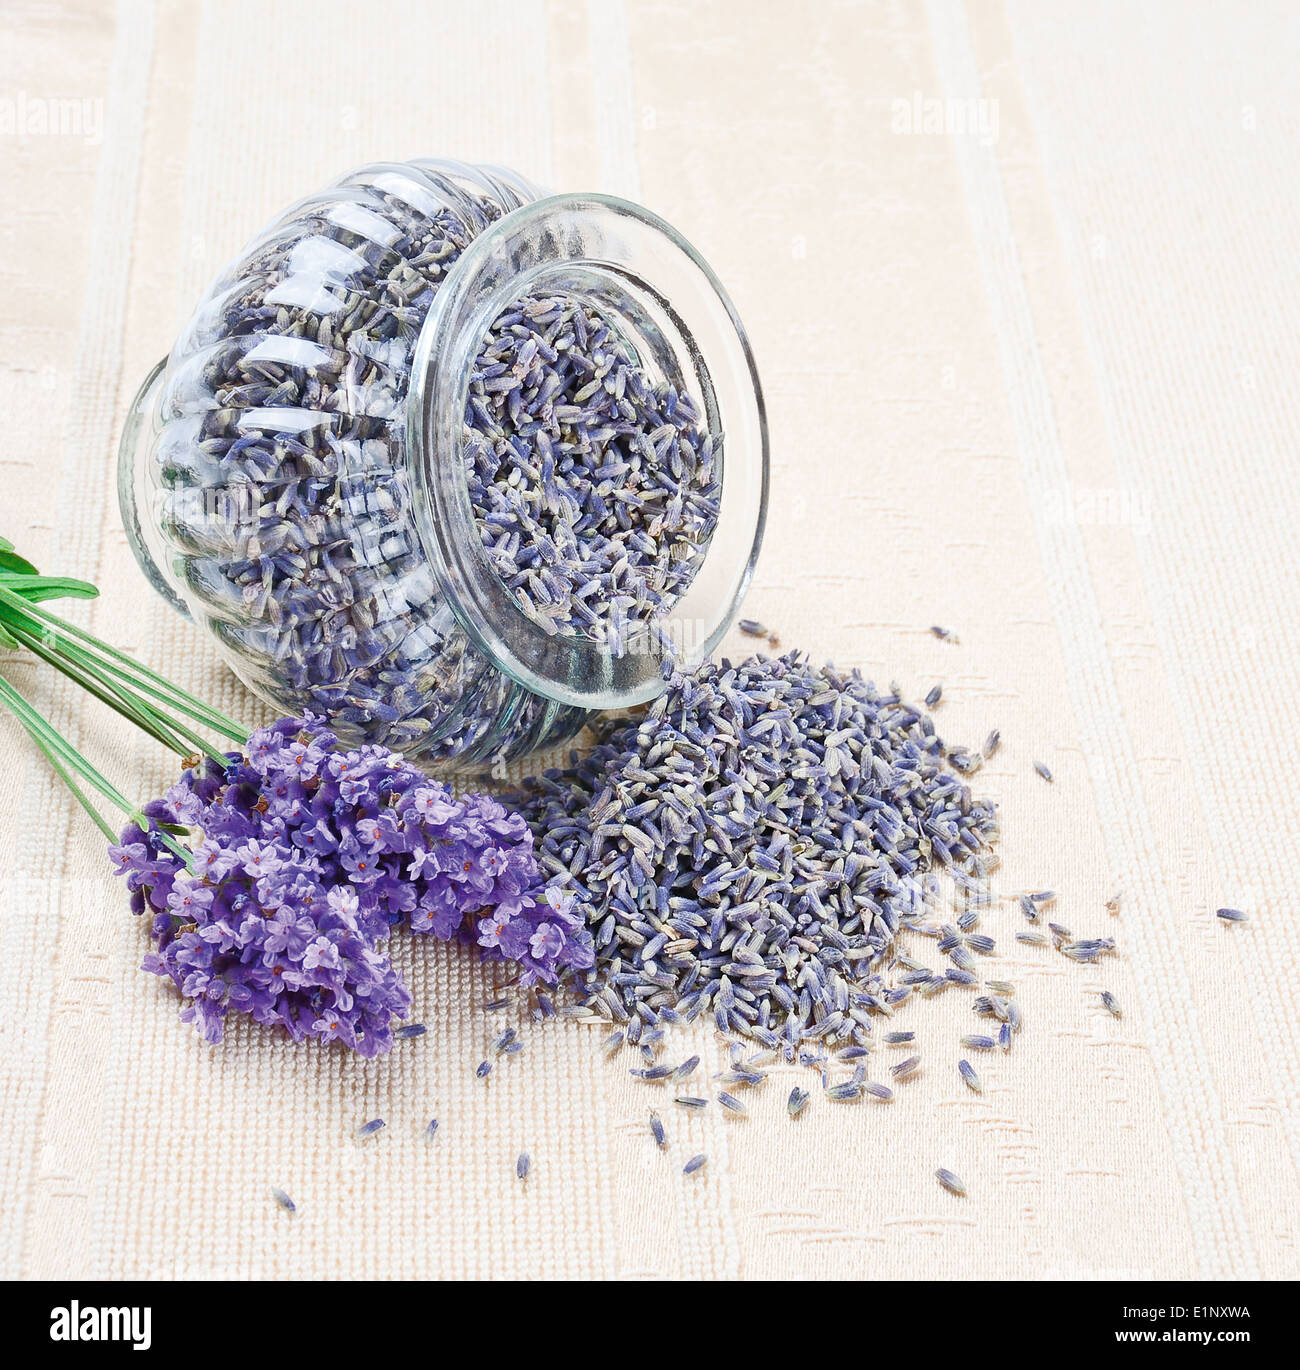 Lavender Flowers Fresh And Dry in a open glass on canvas next to a posy of fresh lavender Stock Photo